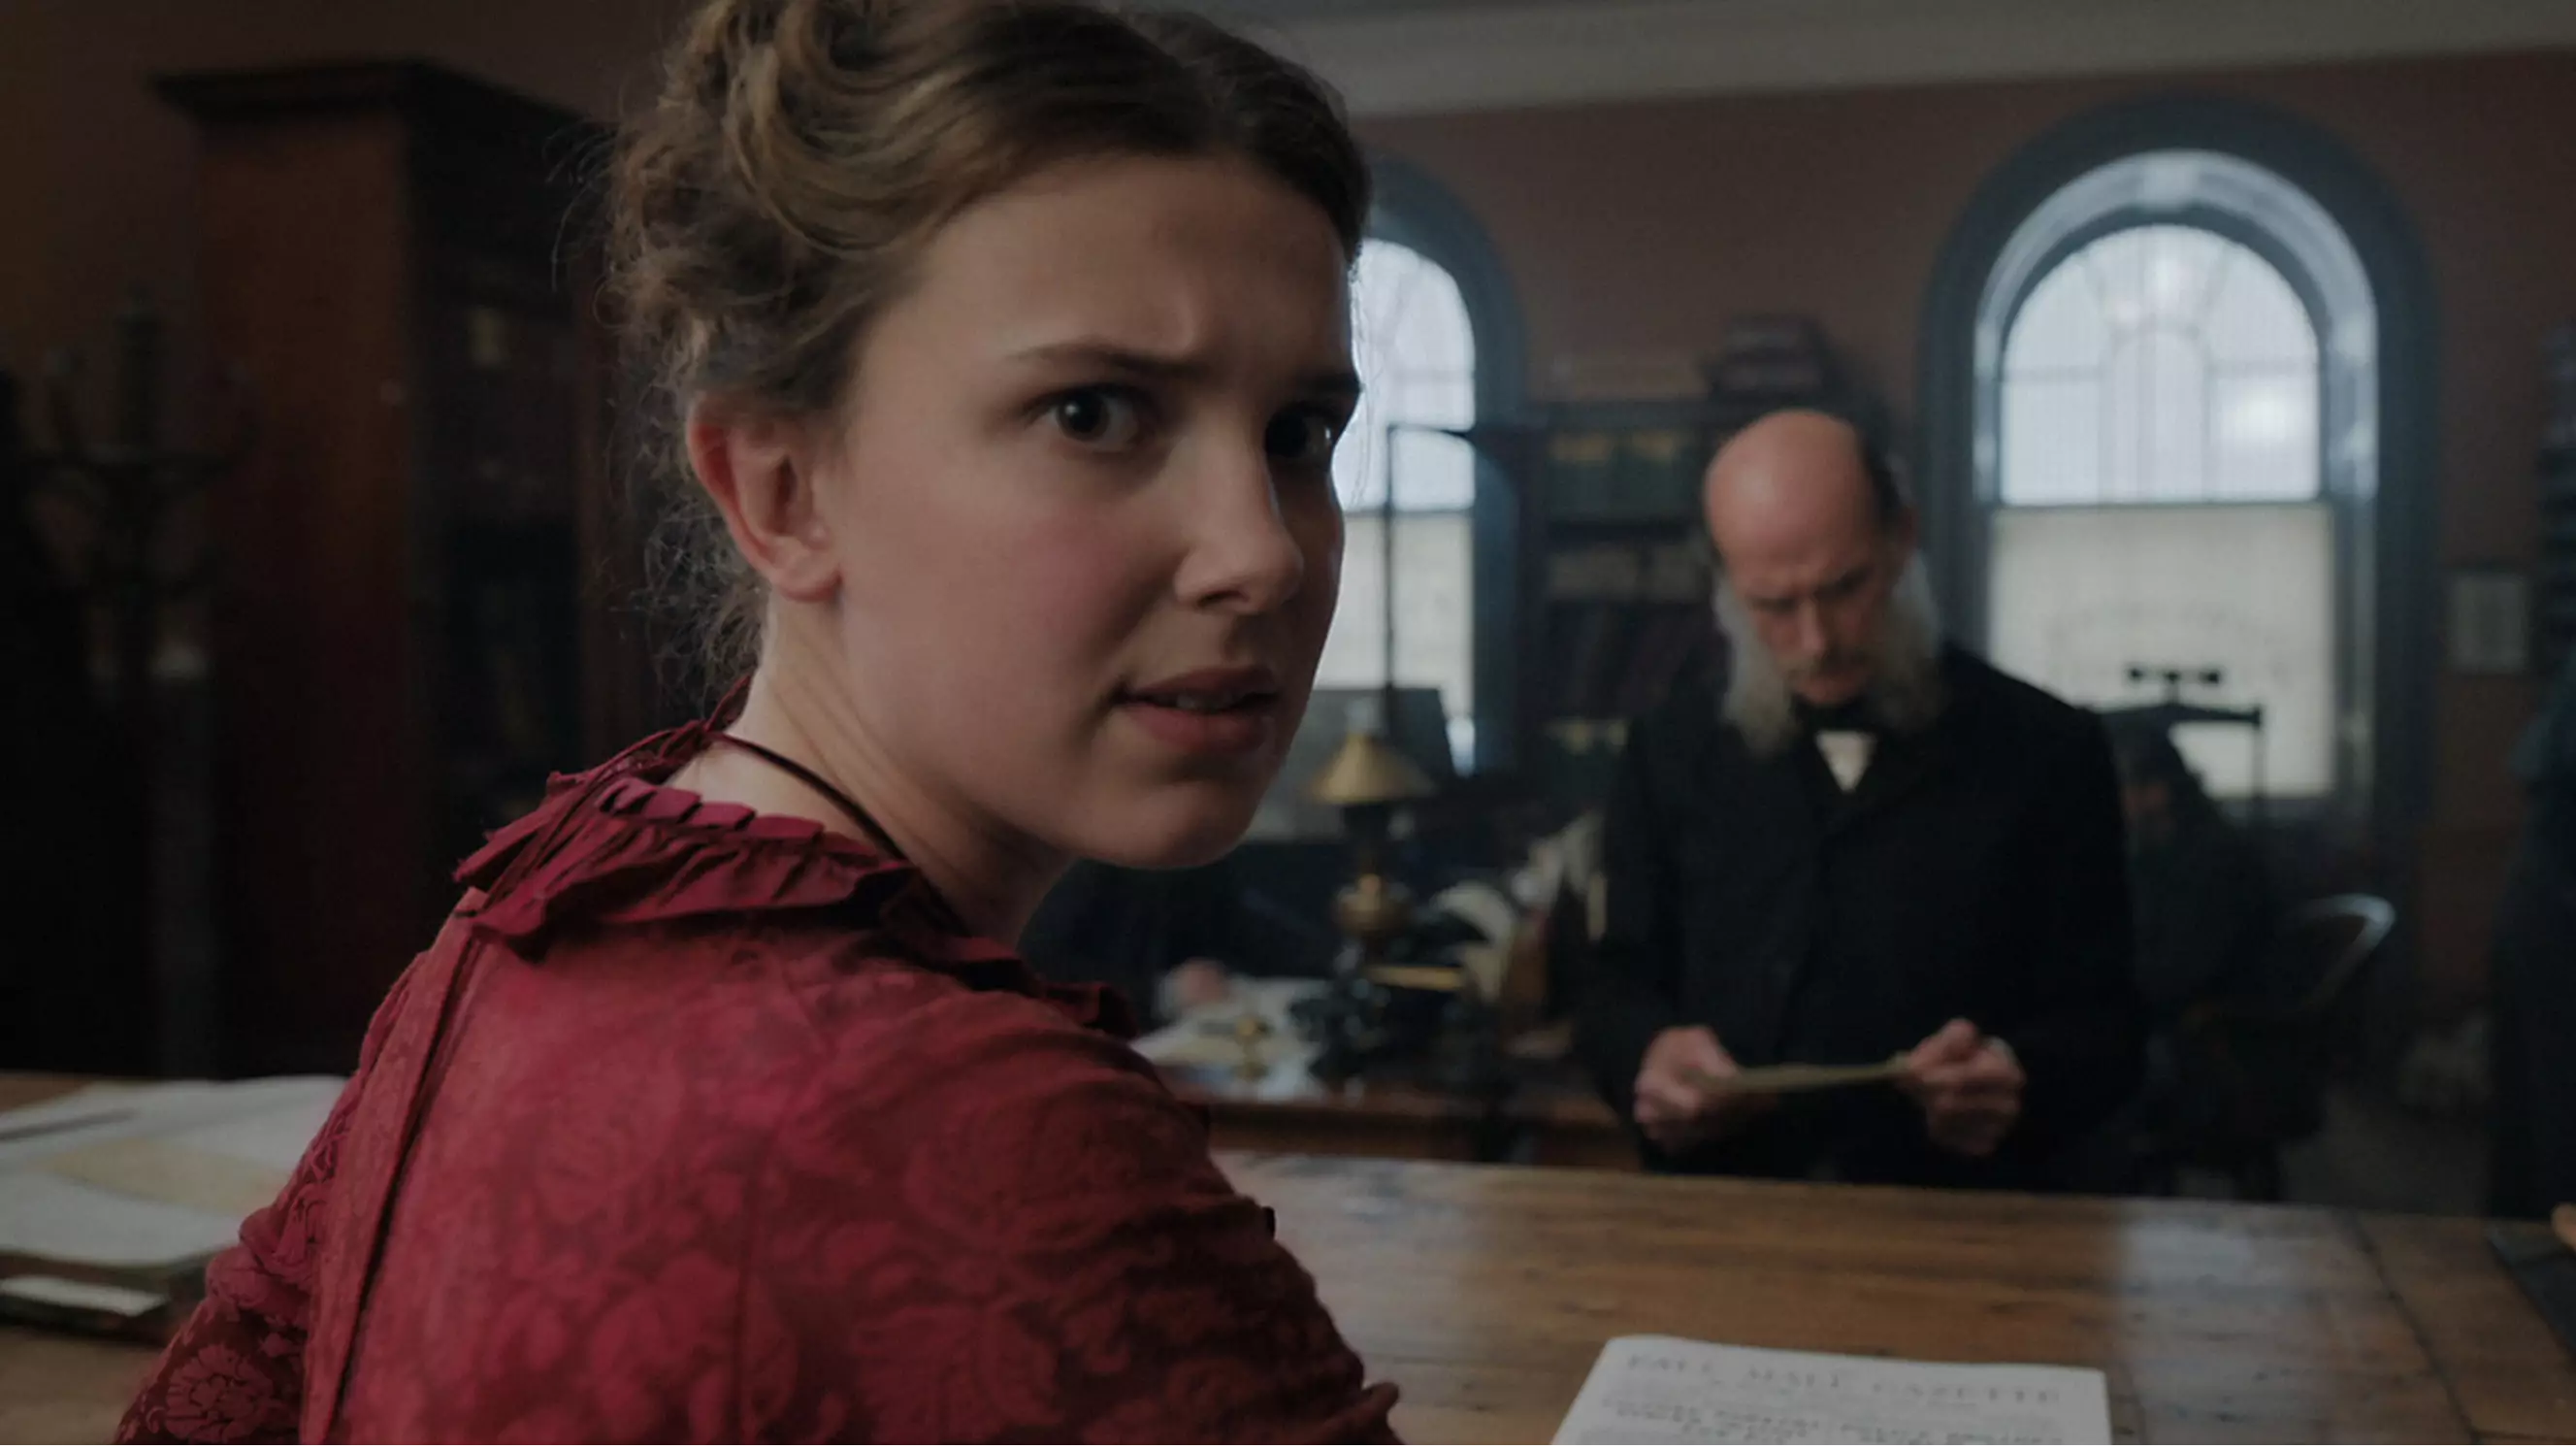 Netflix Drop First Trailer For Millie Bobby Brown New Movie 'Enola Holmes'